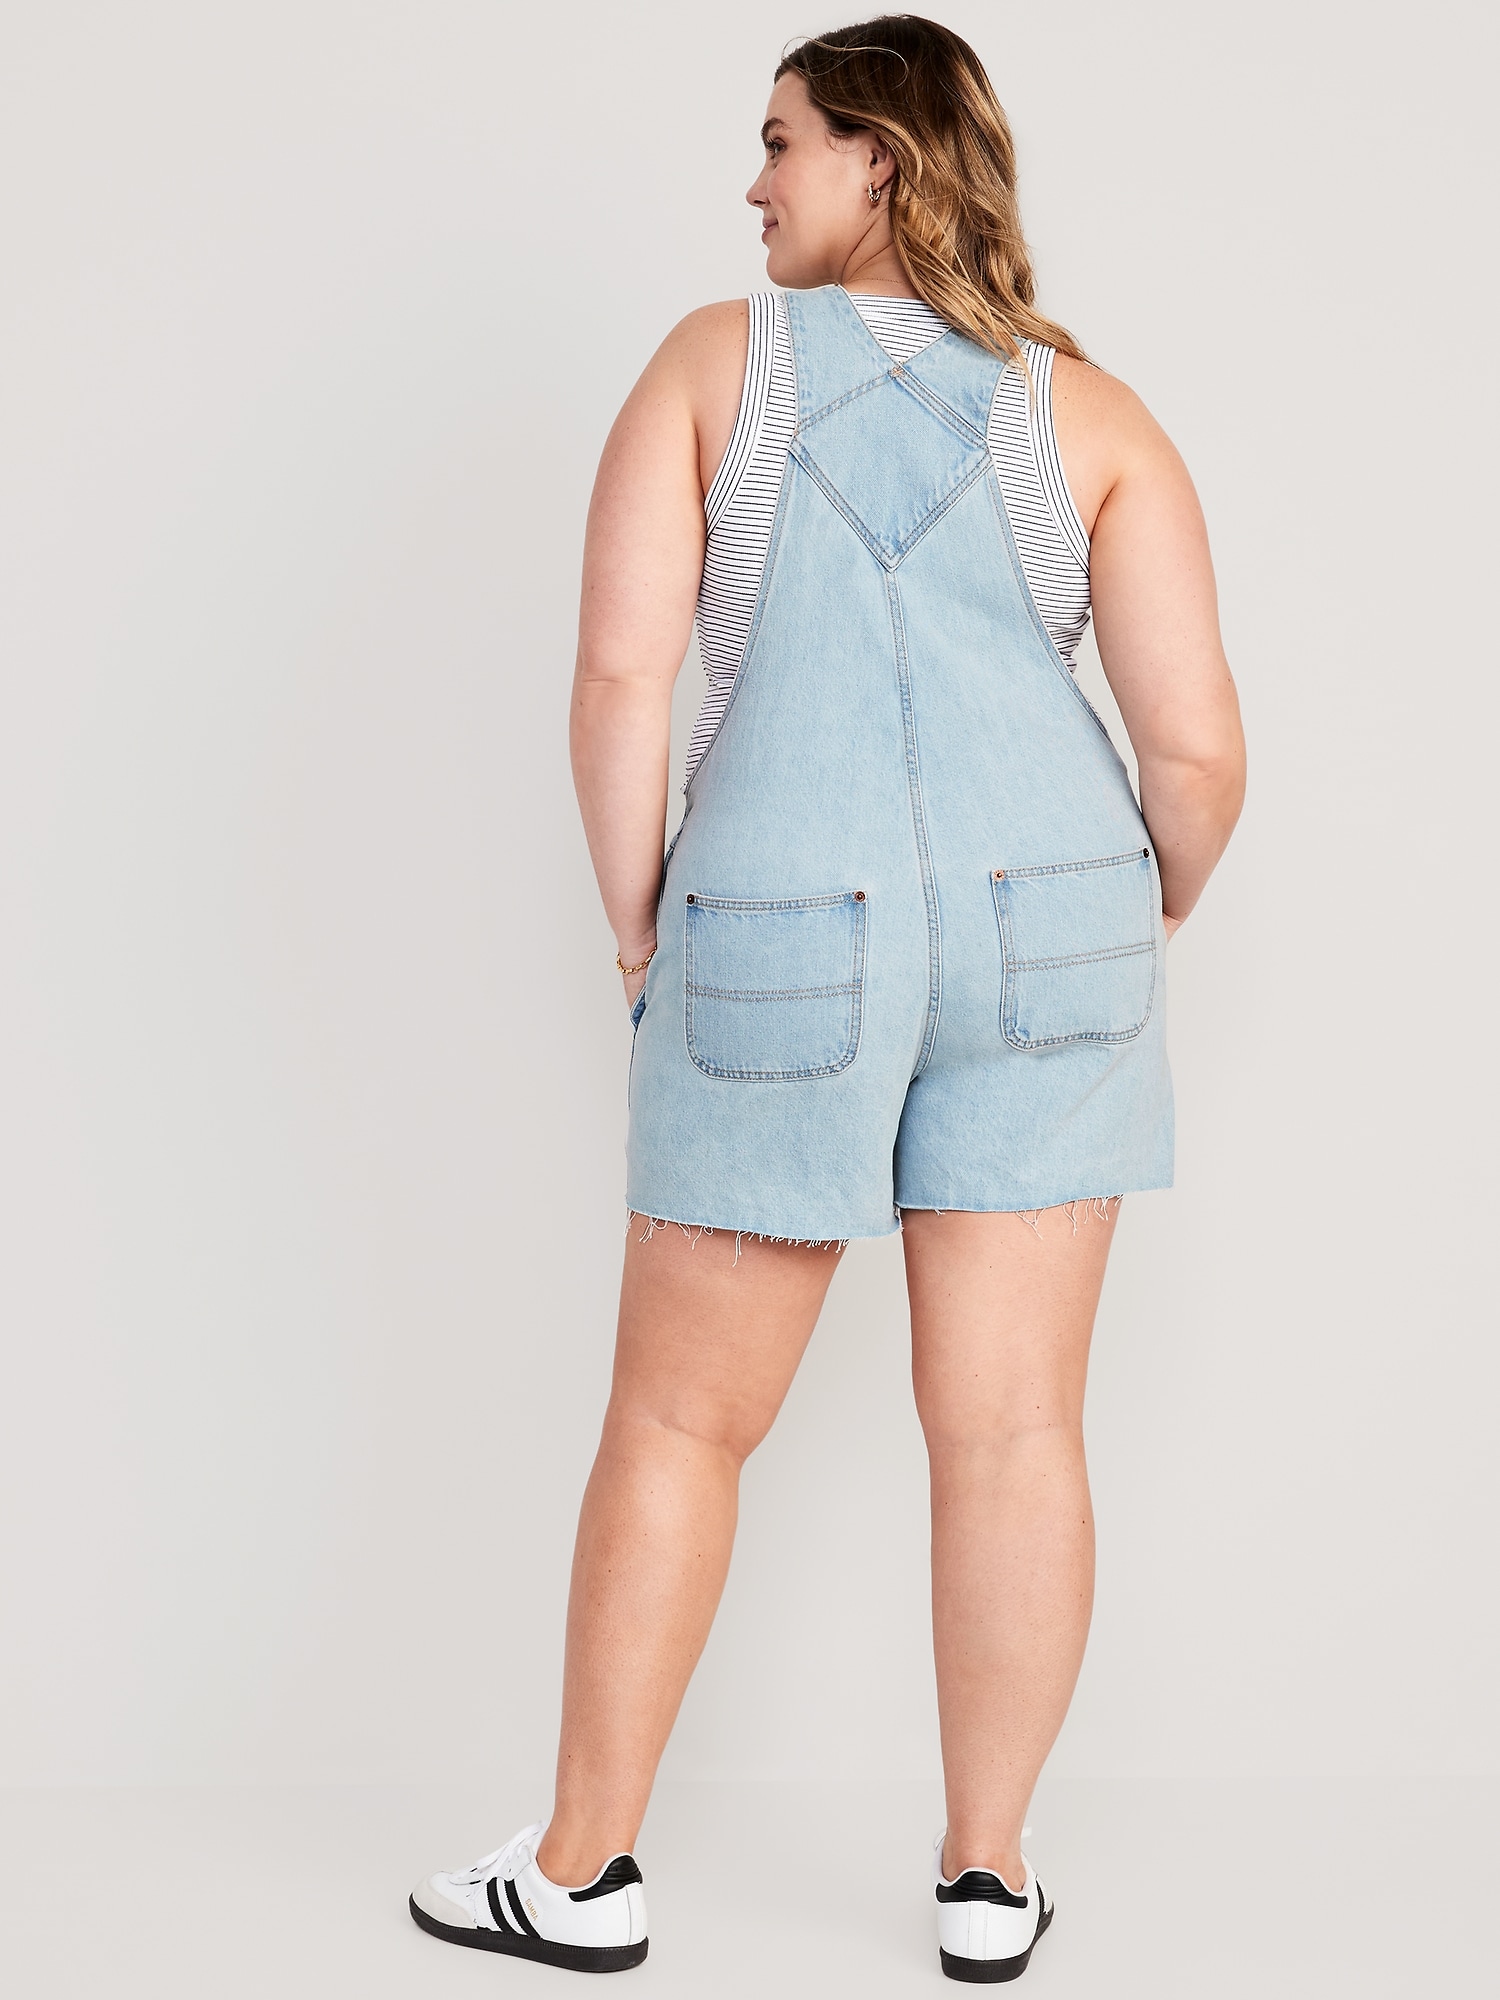 sektor Ewell stamtavle Slouchy Straight Non-Stretch Jean Cut-Off Short Overalls for Women --  3.5-inch inseam | Old Navy